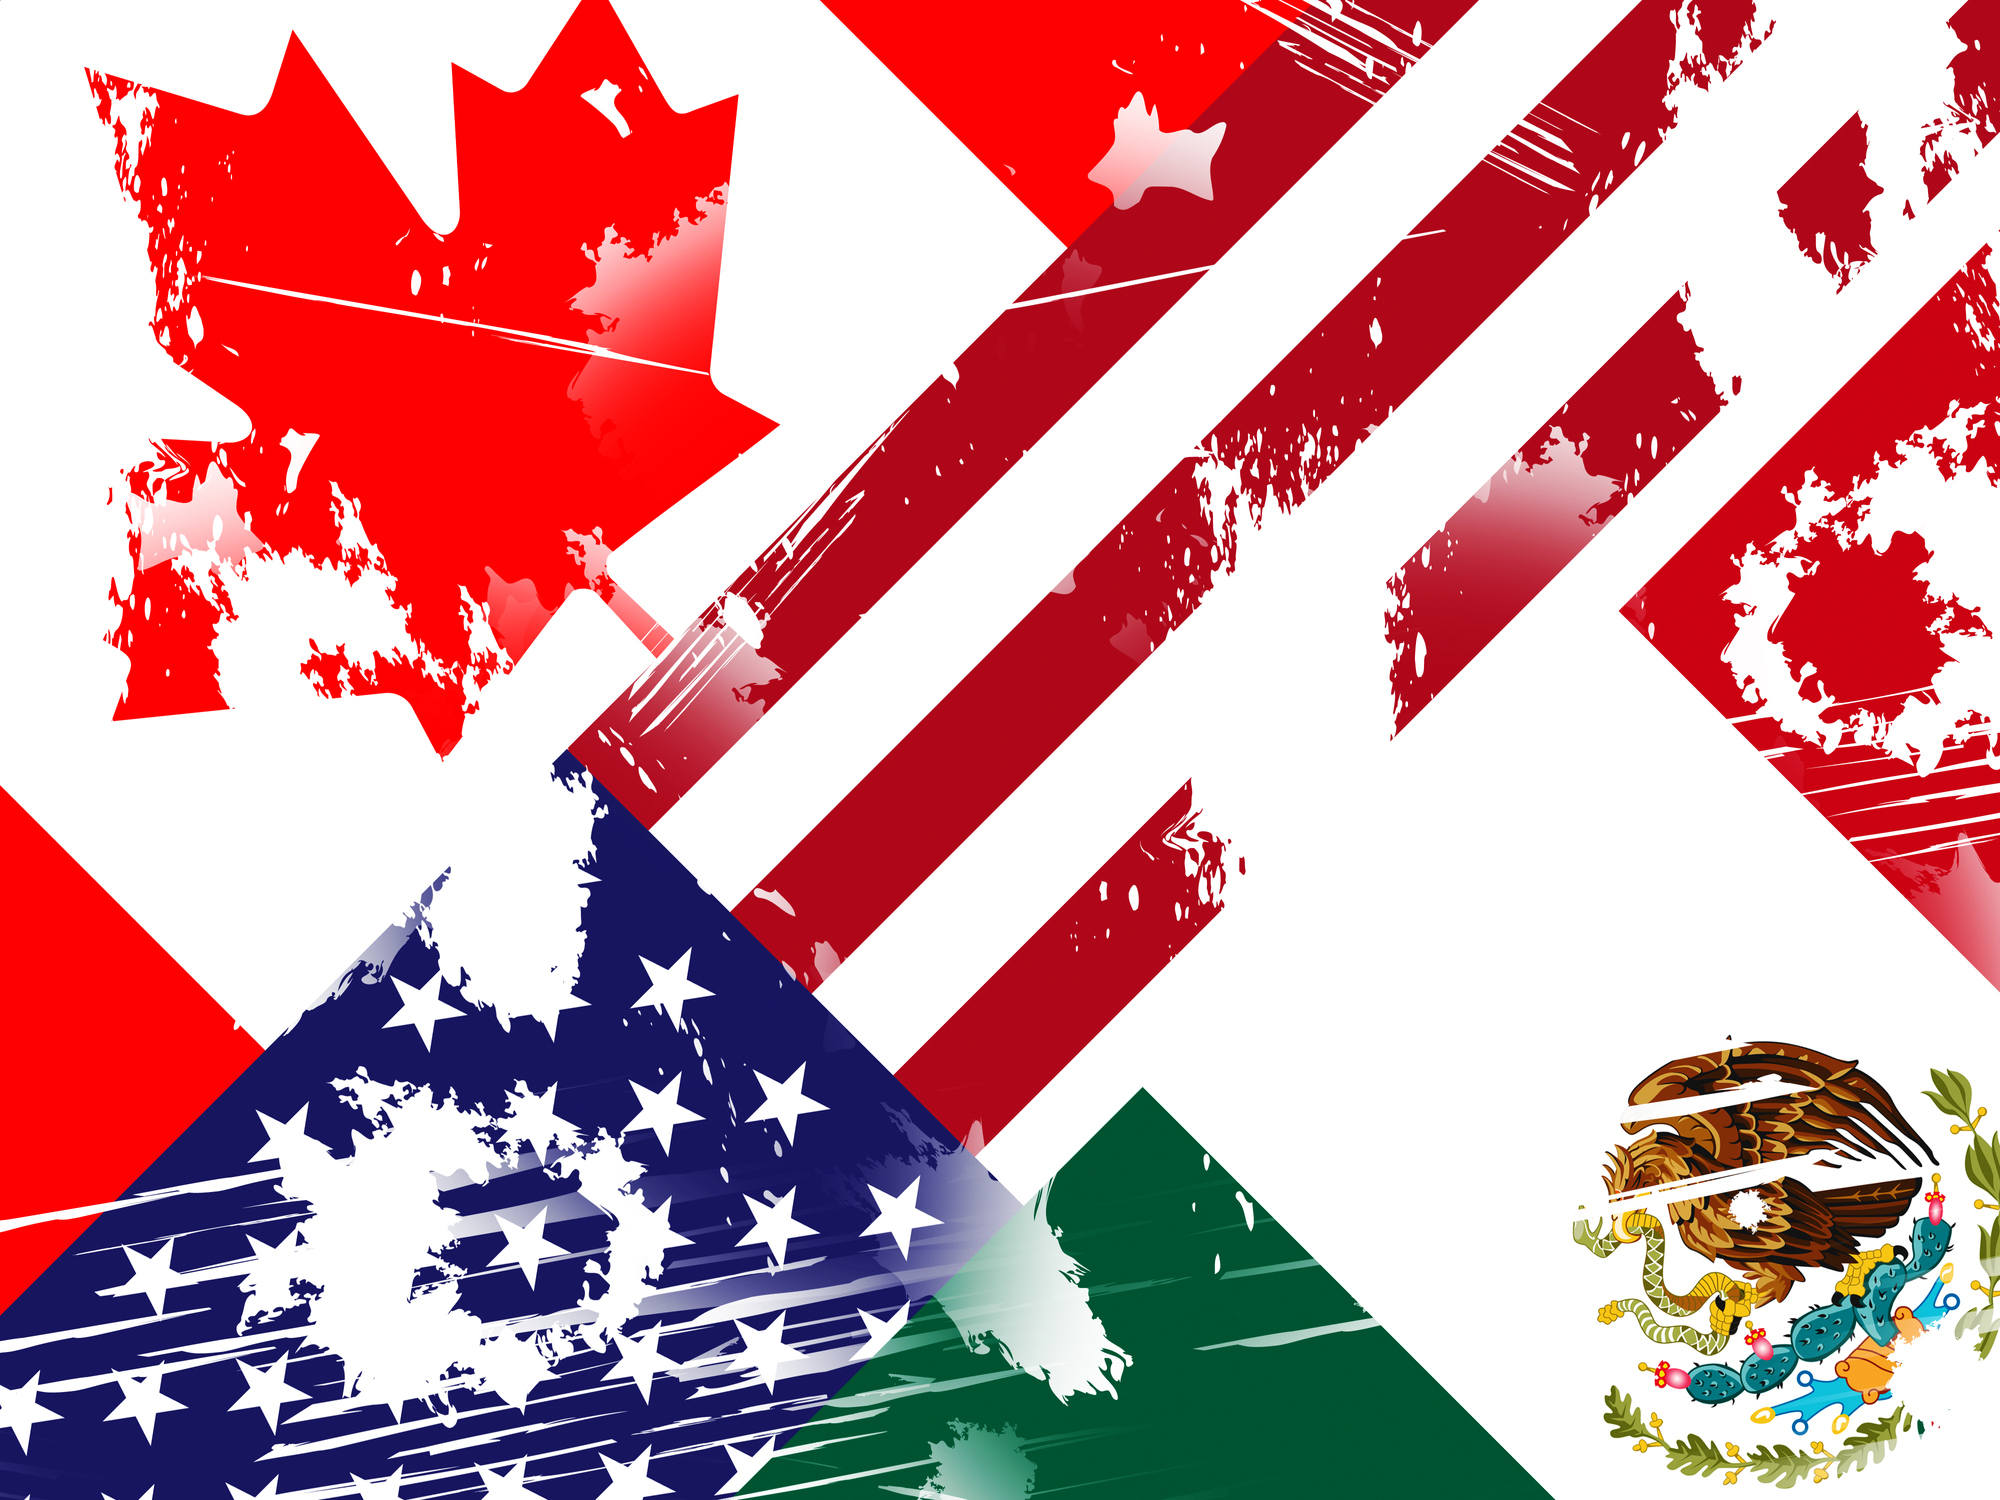 Illustration of NAFTA nation flags Canada, USA, and Mexico.